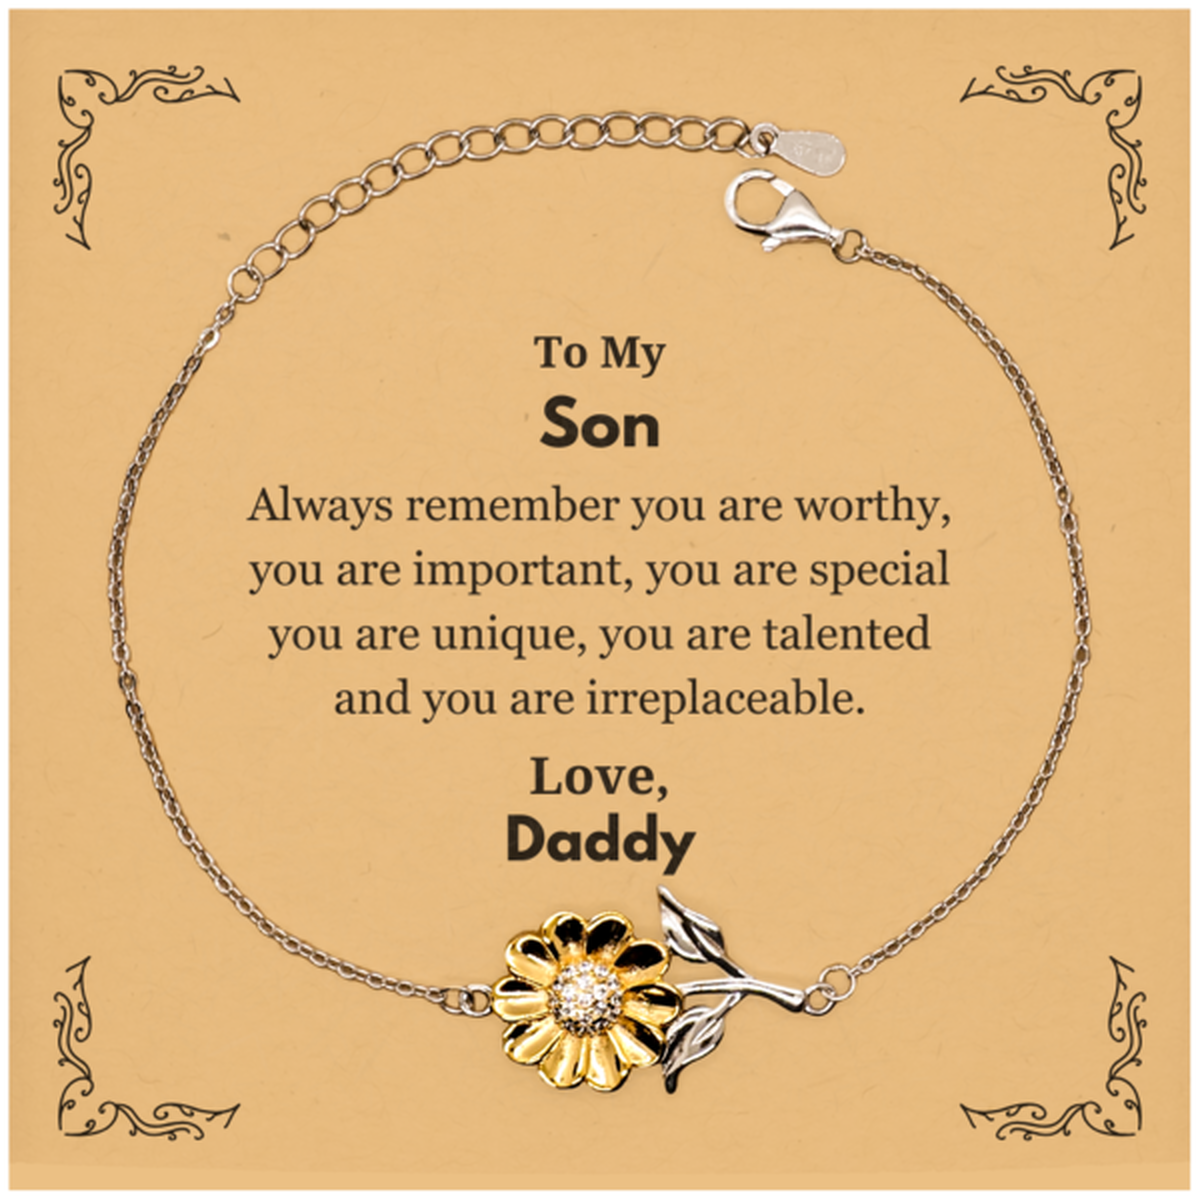 Son Birthday Gifts from Daddy, Inspirational Sunflower Bracelet for Son Christmas Graduation Gifts for Son Always remember you are worthy, you are important. Love, Daddy